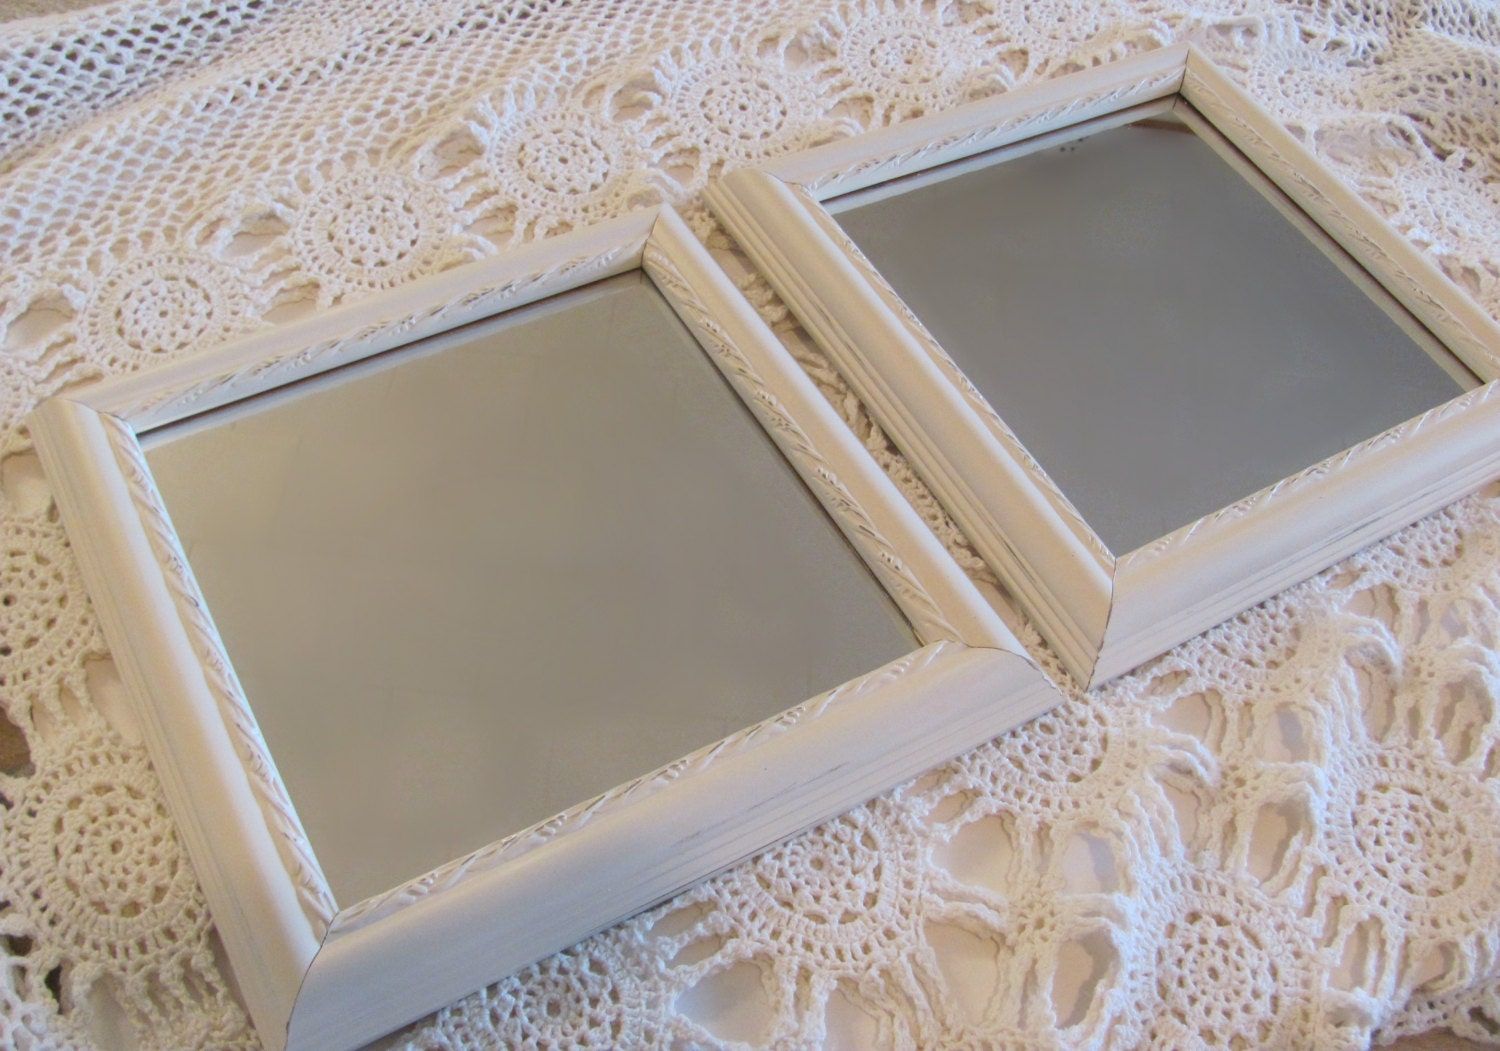 Antique White Wall Mirrors Square Mirrors Cream Framed Pair Regarding White Square Wall Mirrors (View 6 of 15)